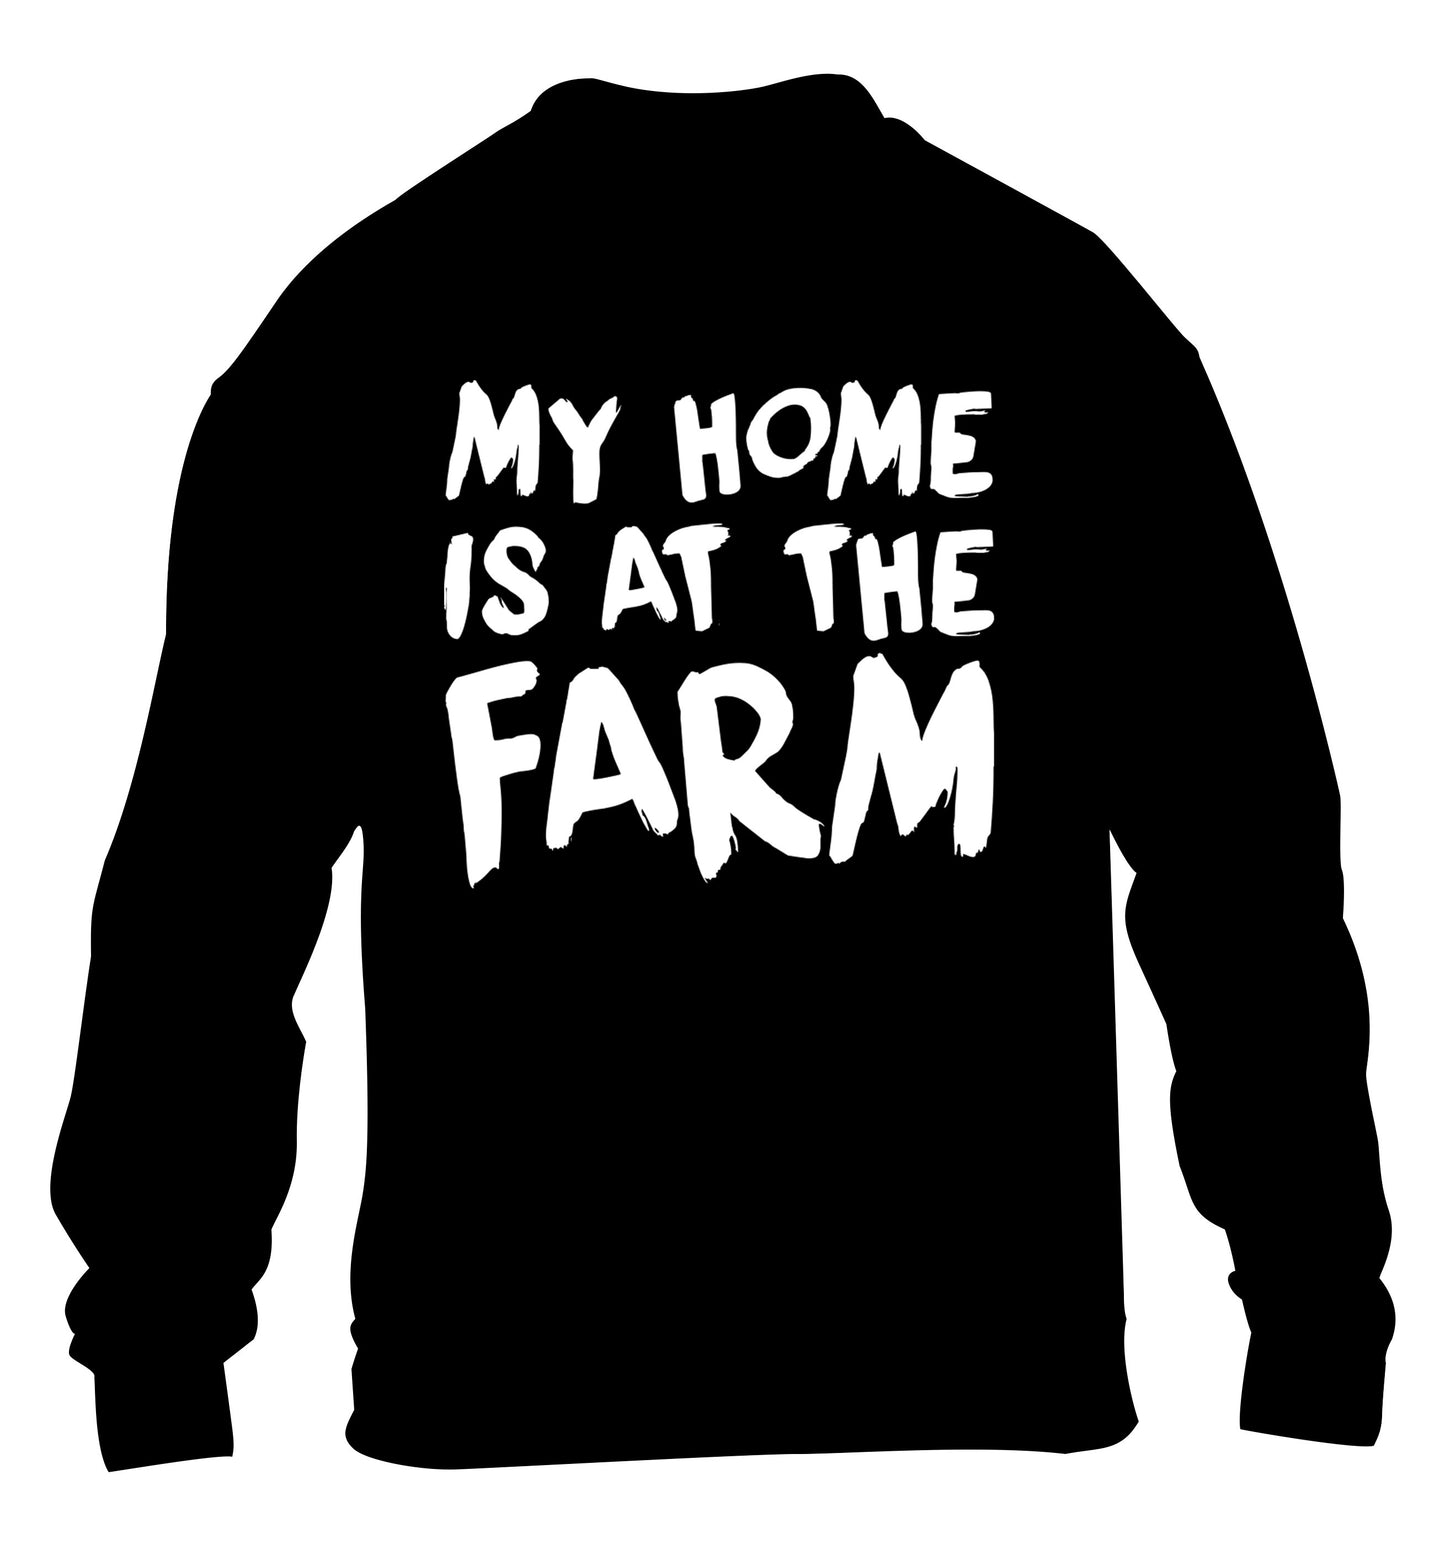 My home is at the farm children's black sweater 12-14 Years